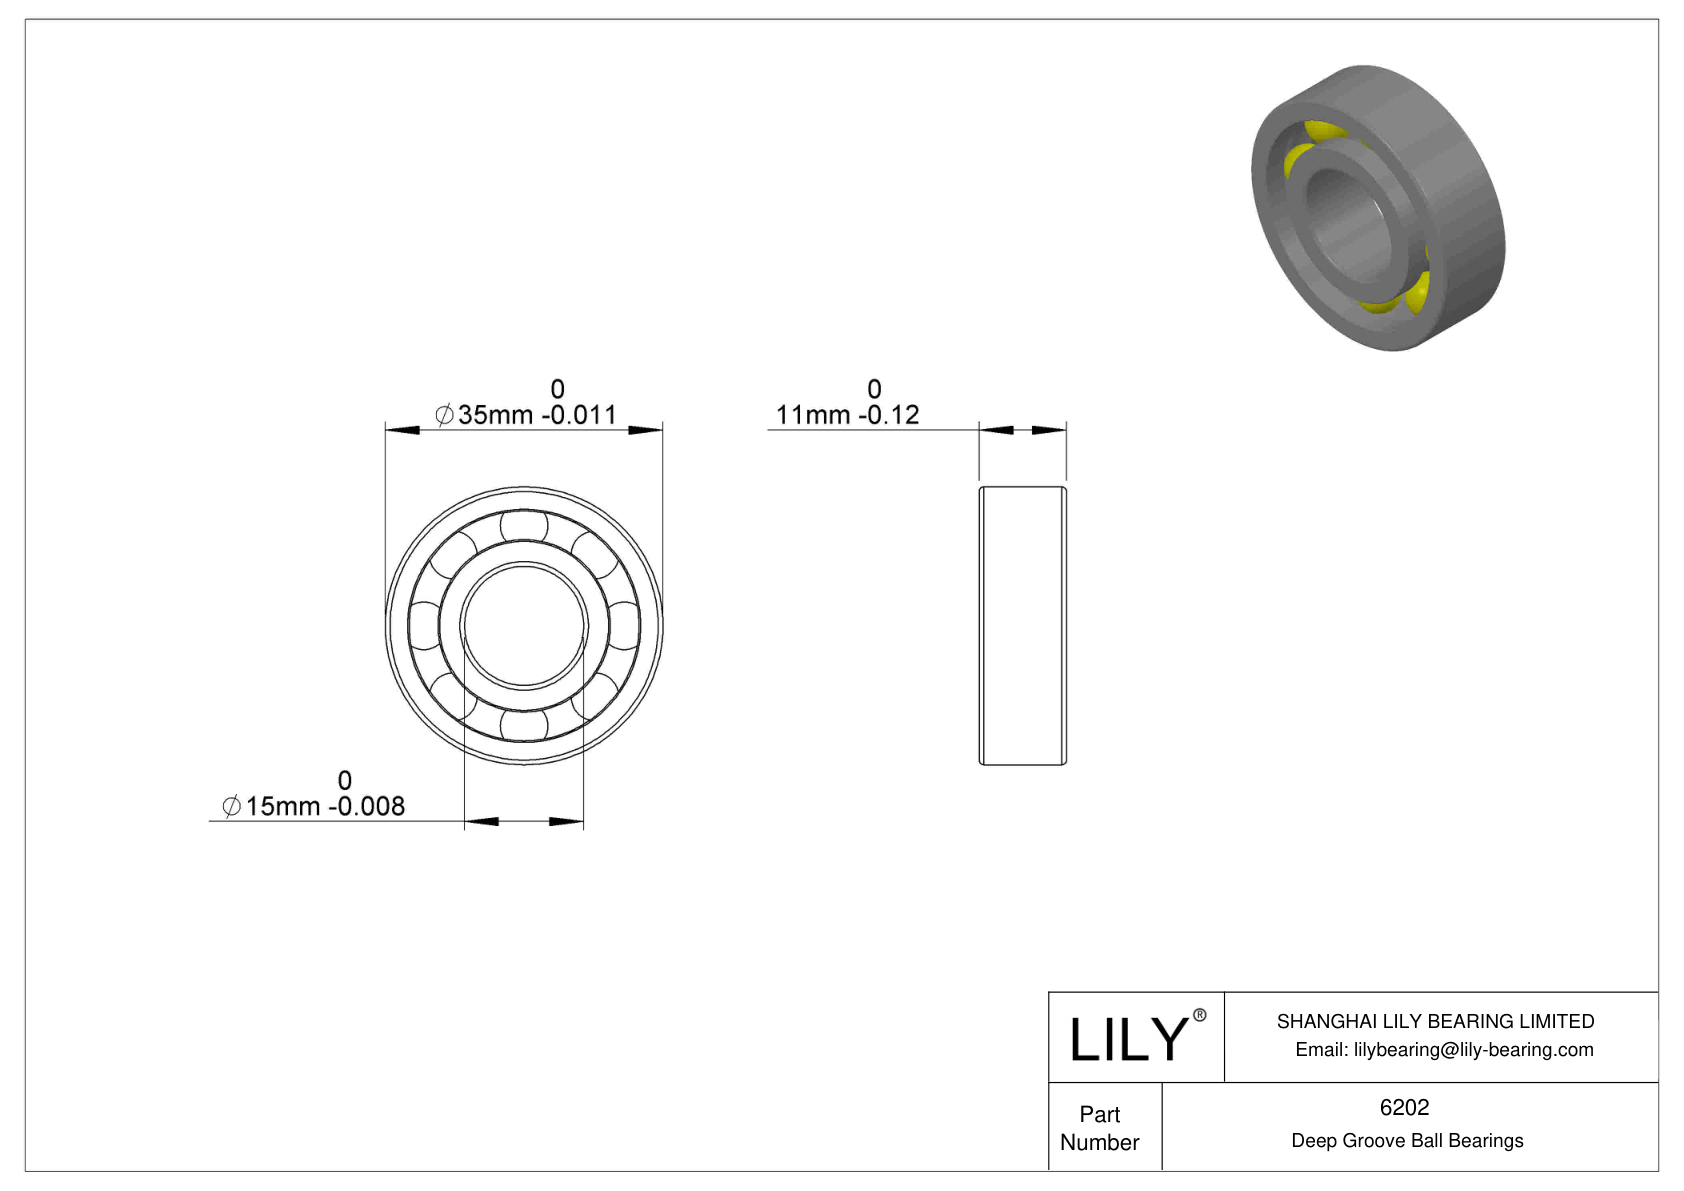 LILY-PU620140-18C5L12M10 Polyurethane Coated Bearing With Screw cad drawing